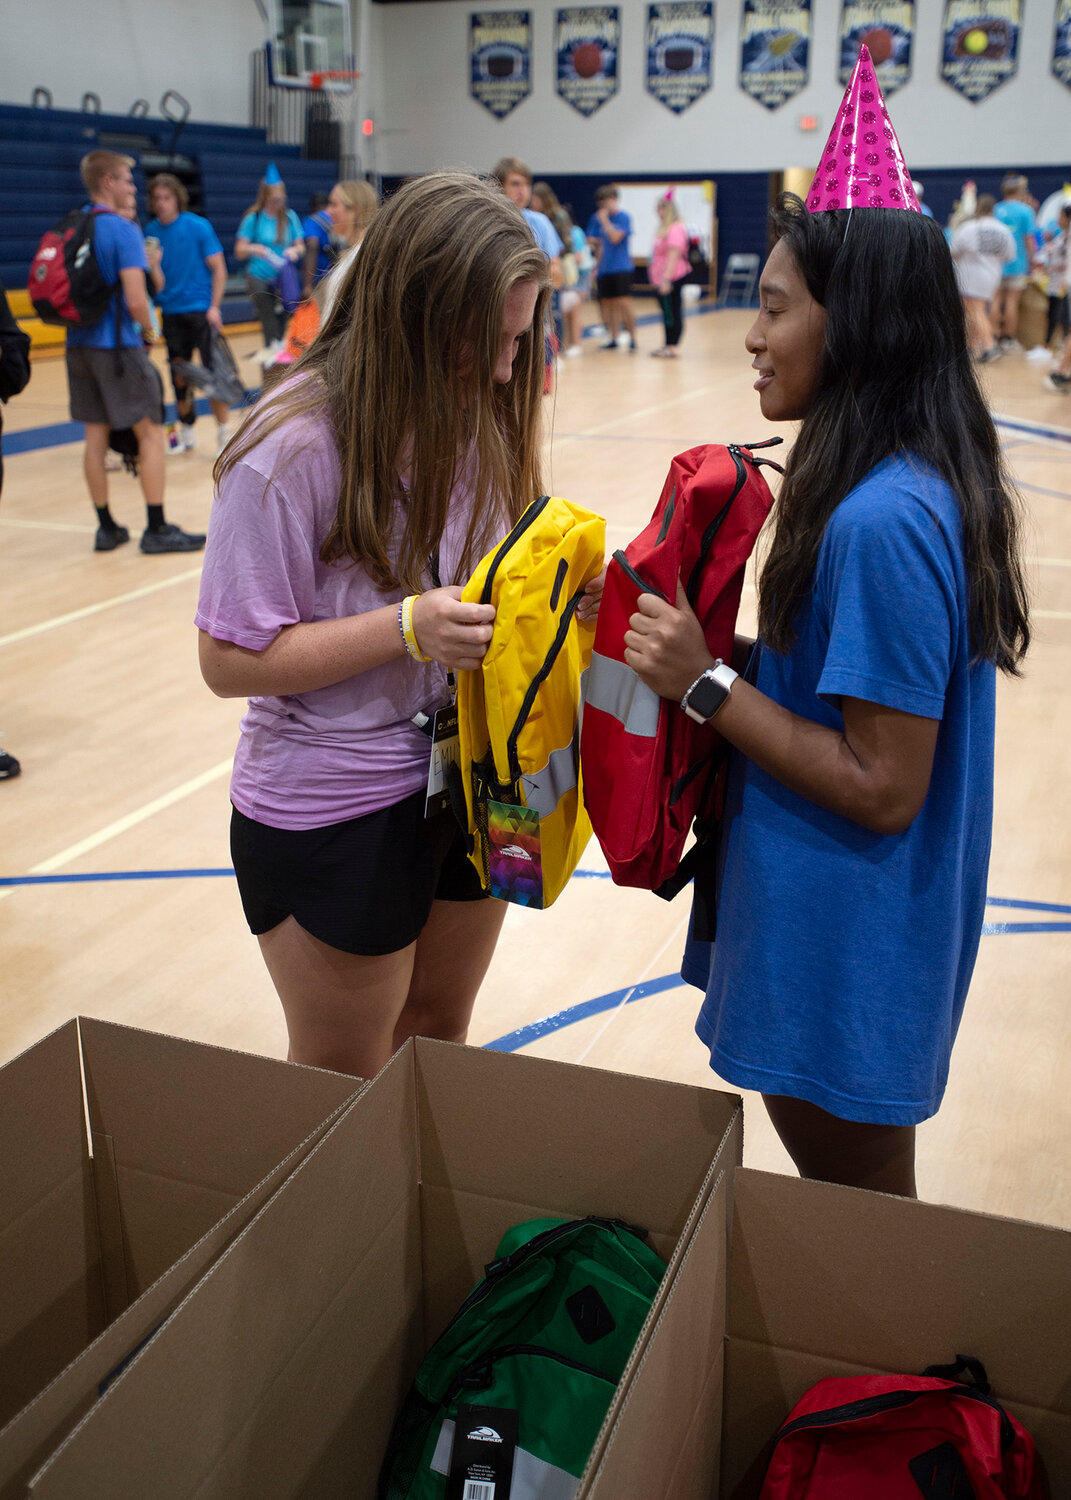 Emily Sinclair, left, and Joshwelle Dela Rama pray over backpacks they just filled at a "Backpack Party" at Confluence 2023 at Eagle's Landing First Baptist Church in McDonough, Ga., Saturday, Sept. 23, 2023. Both are students at Valdosta State. Students filled more than 650 backpacks for Mission Georgia's outreach programs. (Index/Henry Durand)